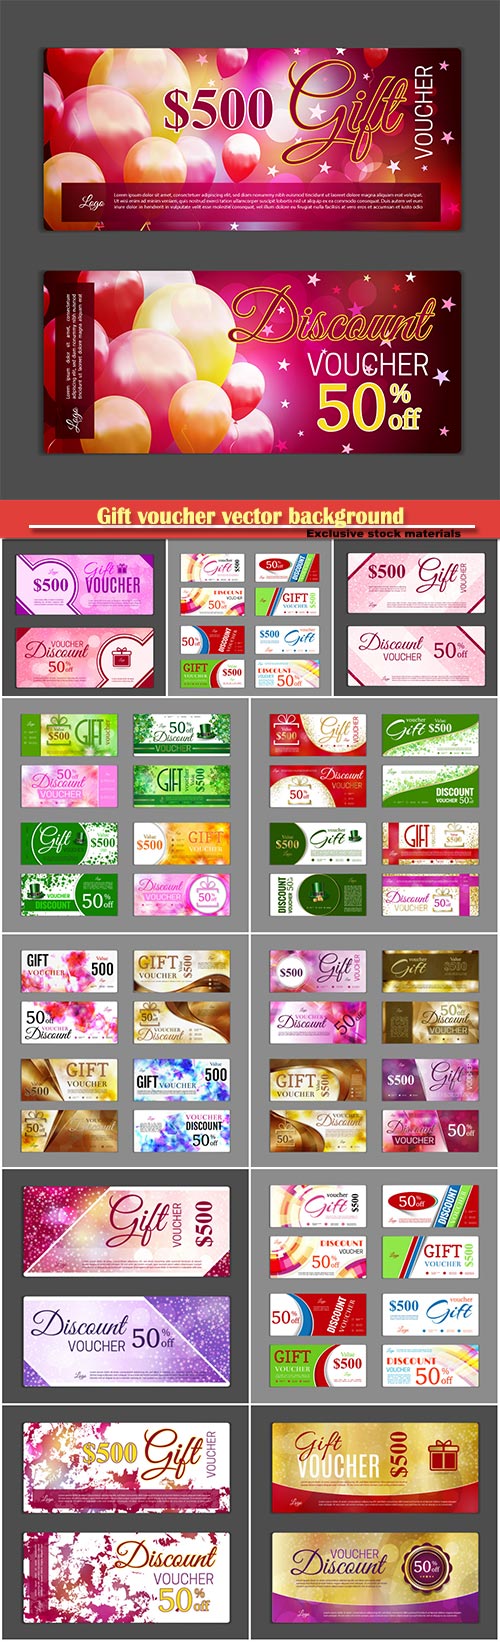 Gift voucher vector background, shopping cards, discount coupon, banner, di ...